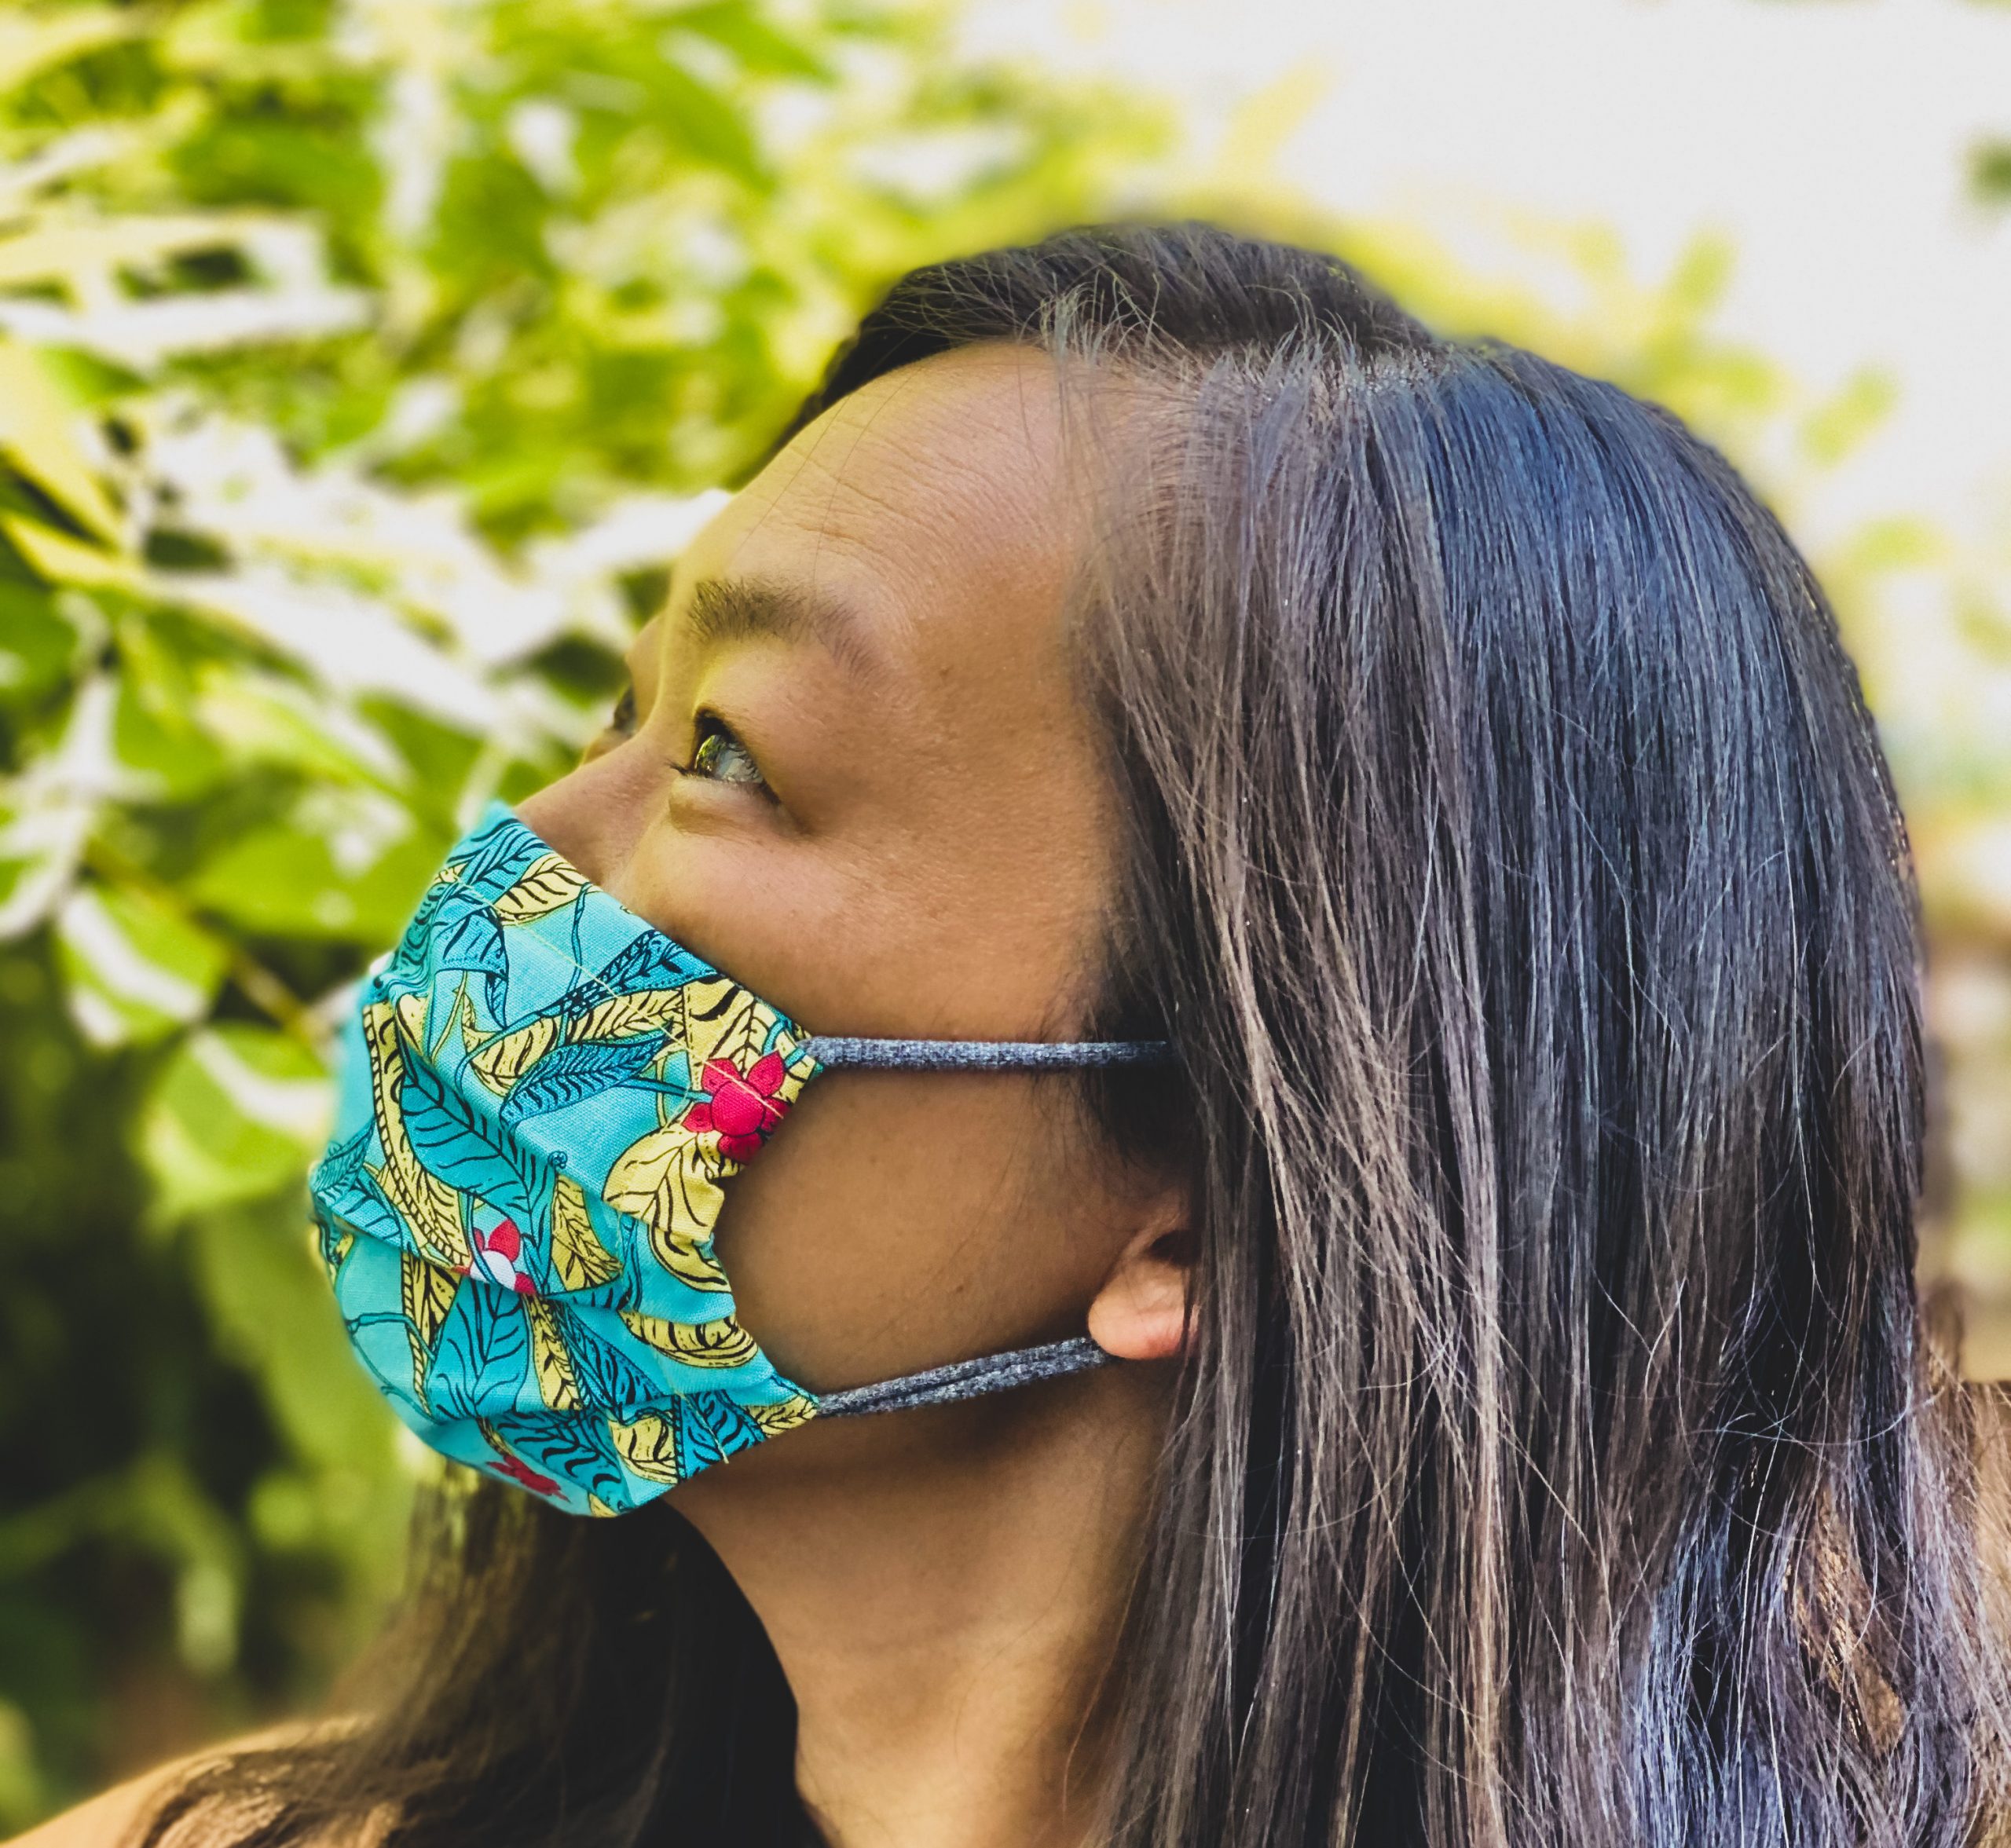 An Asian American woman poses for a profile photo wearing a colorful green mask.